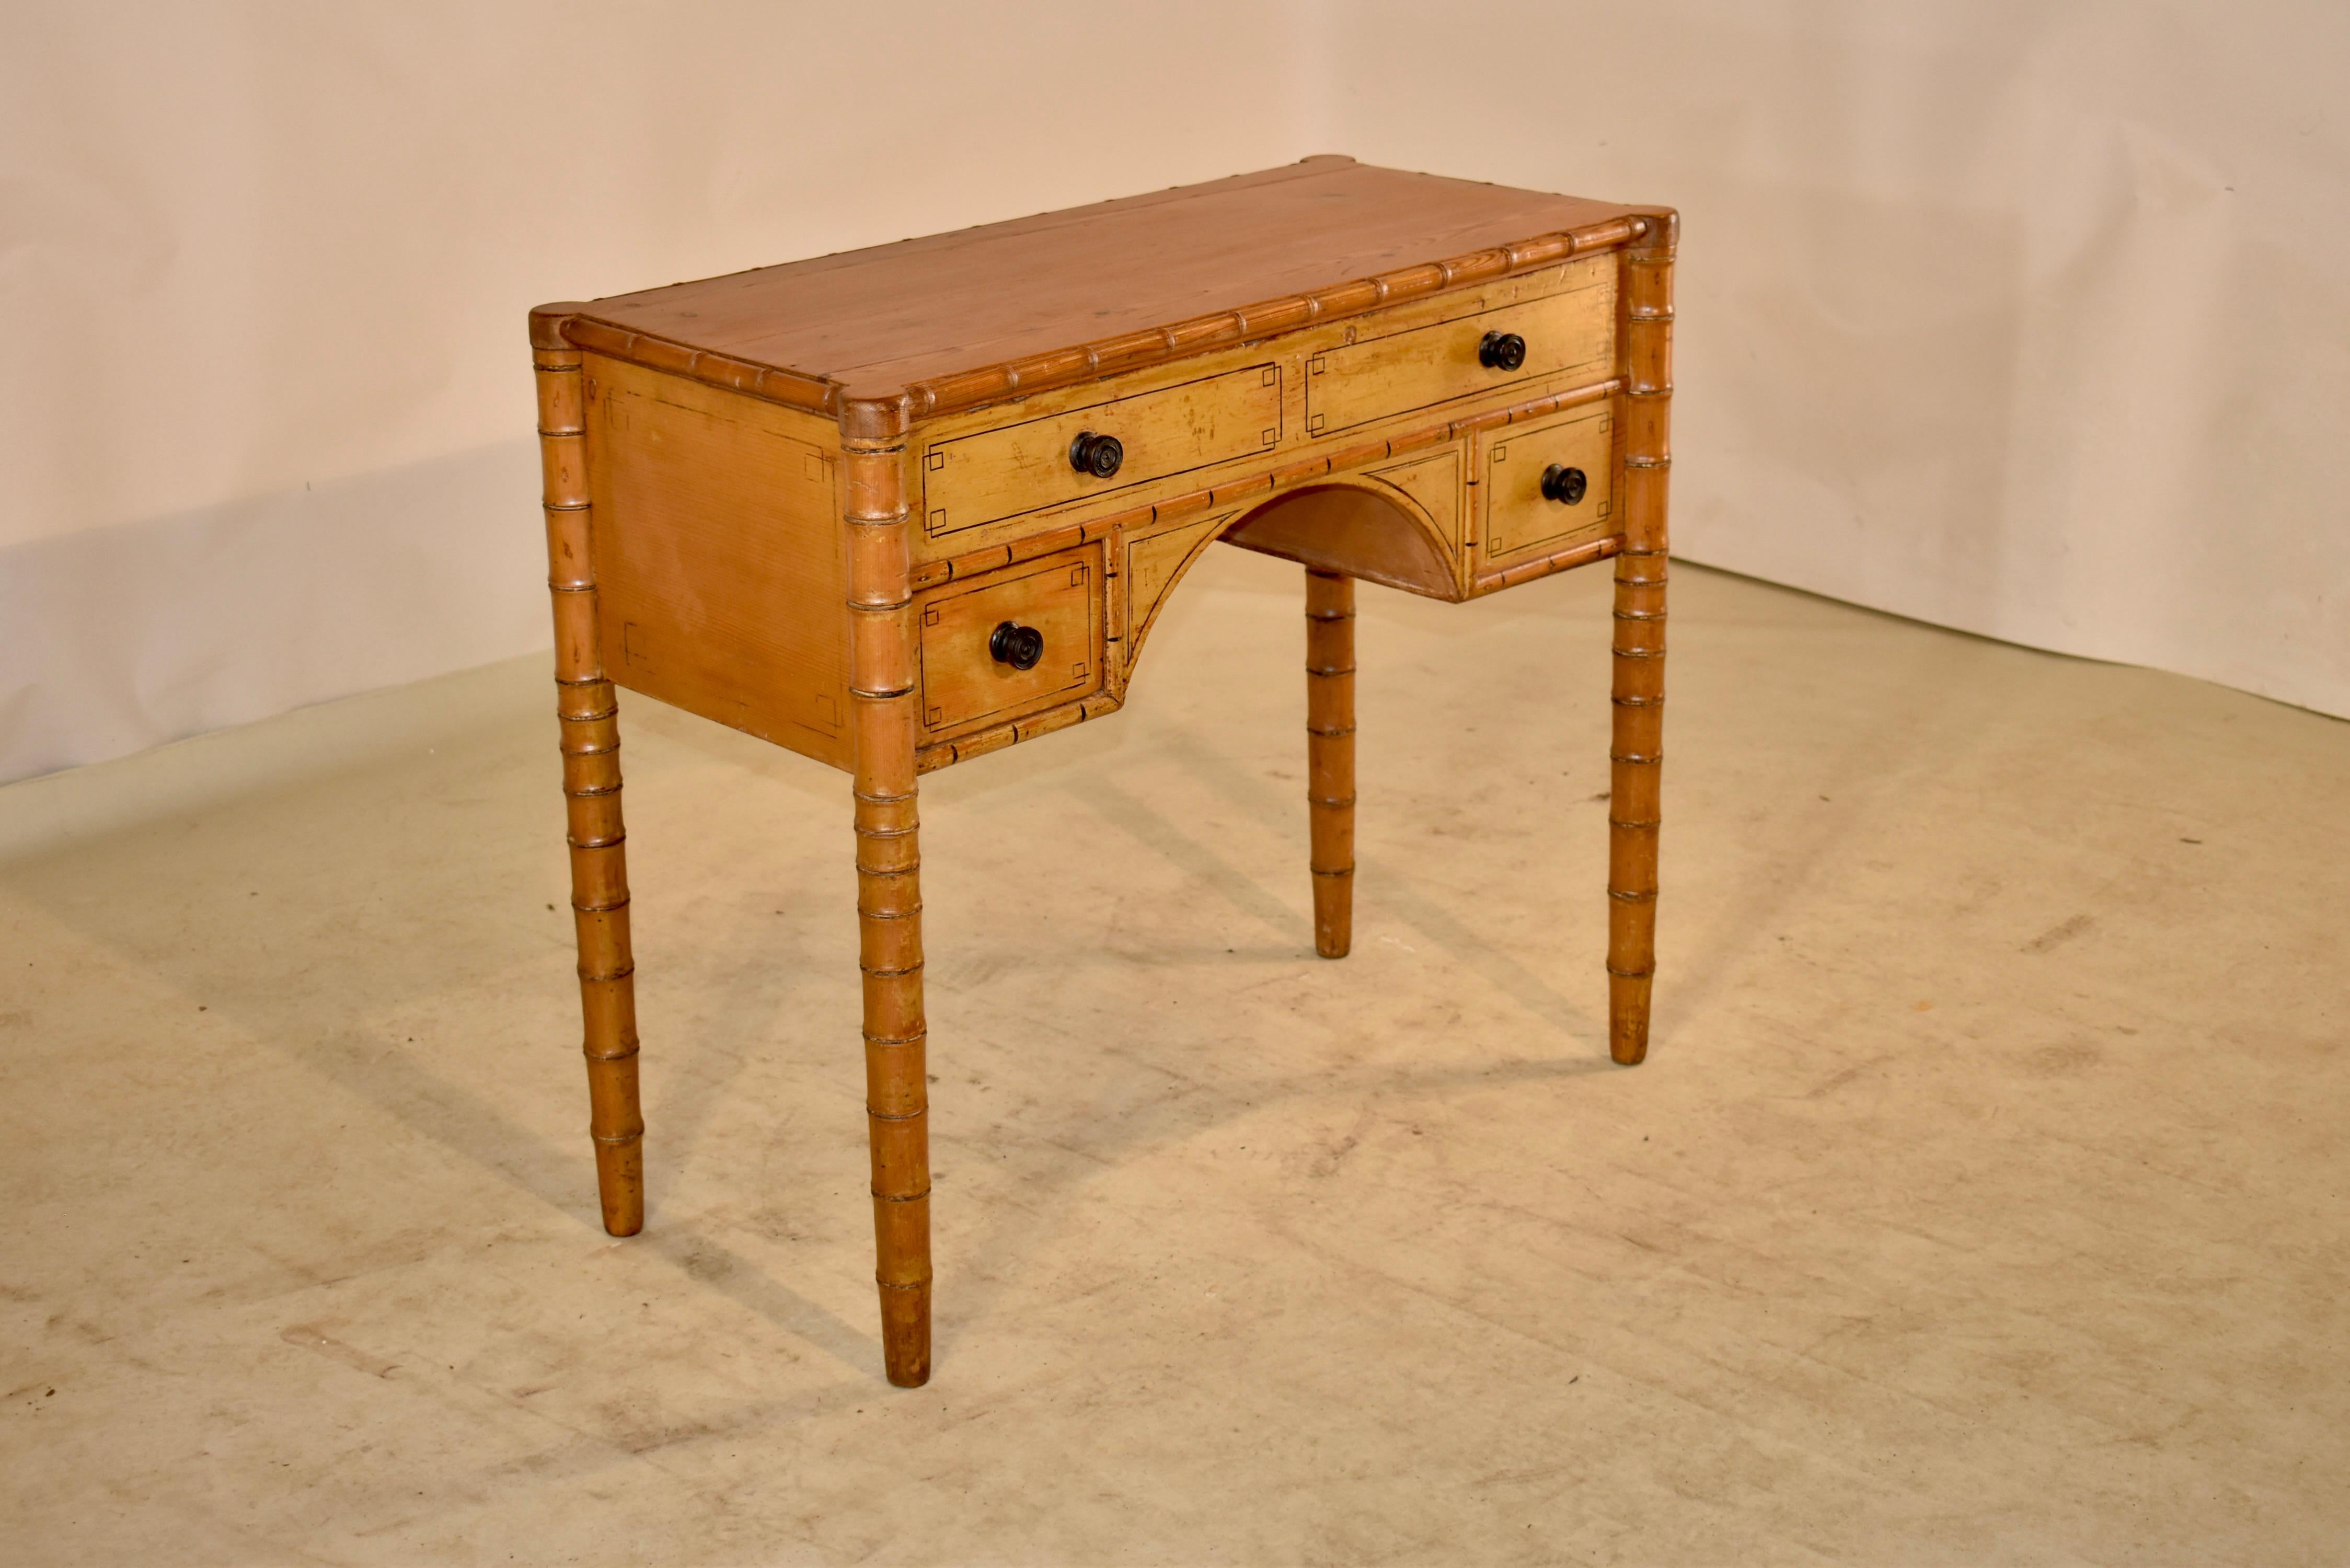 19th century pine side table from France with a shaped top and supported on four hand turned faux bamboo legs. There is one real drawer in the front and three false drawers. The sides are simple and the piece has hand painted accents. This is a very